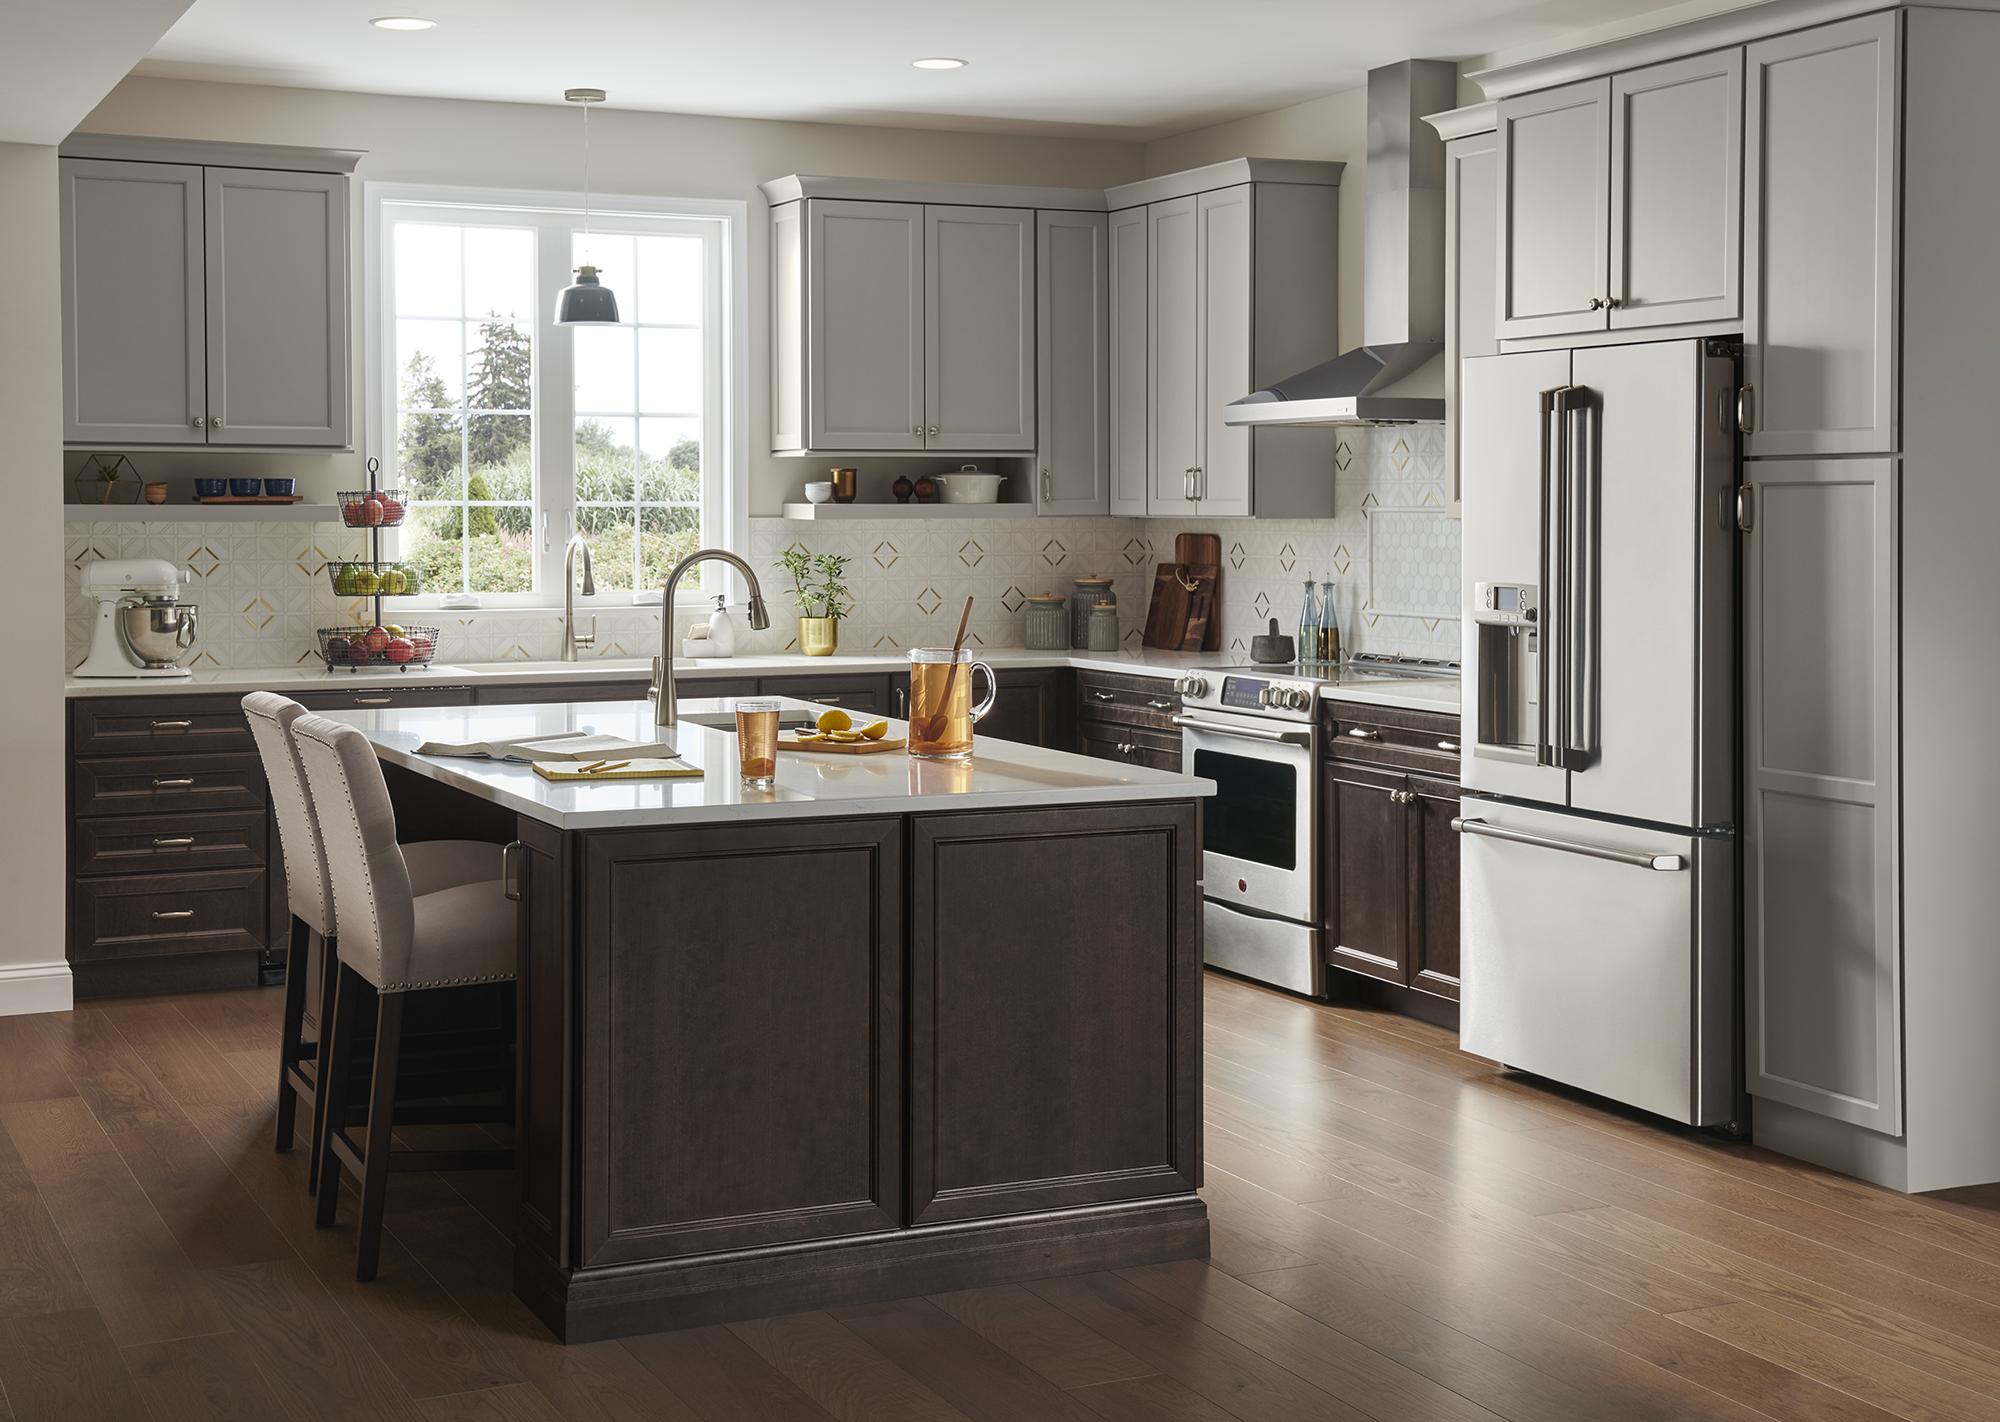 Classic Cabinets - Kona Cabinetry